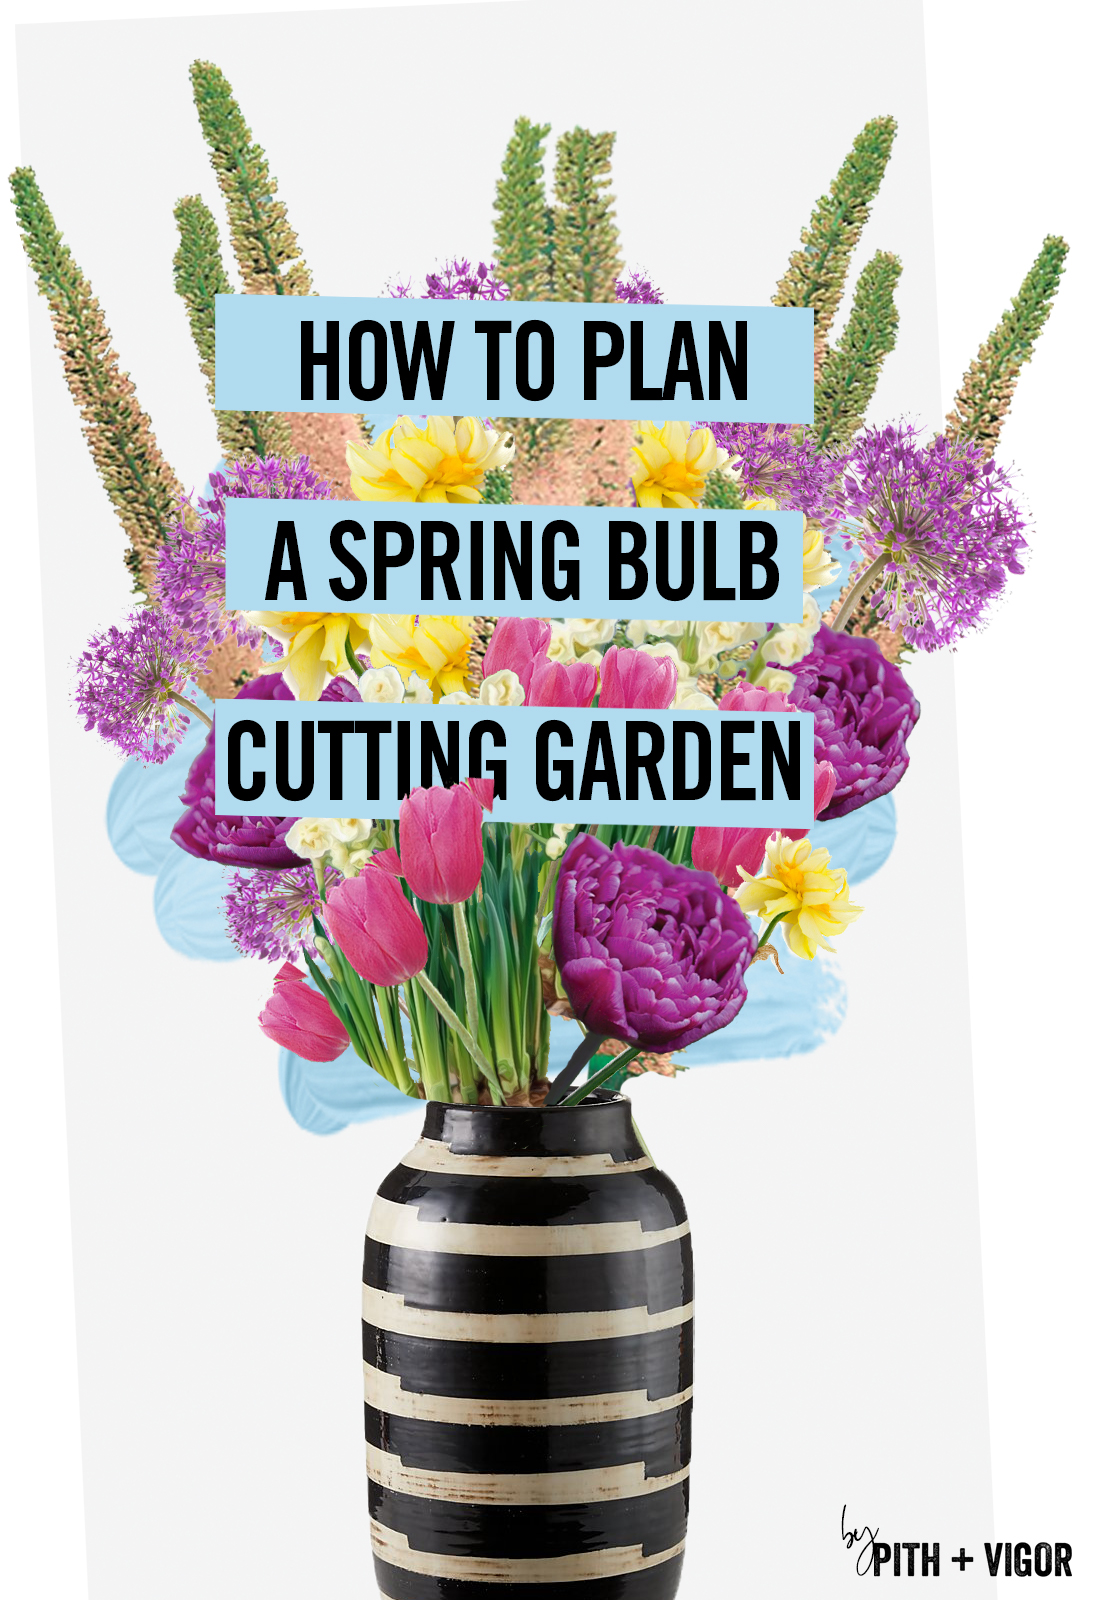  how to plan and plant a spring bulb cutting garden - by pith + VIGOR